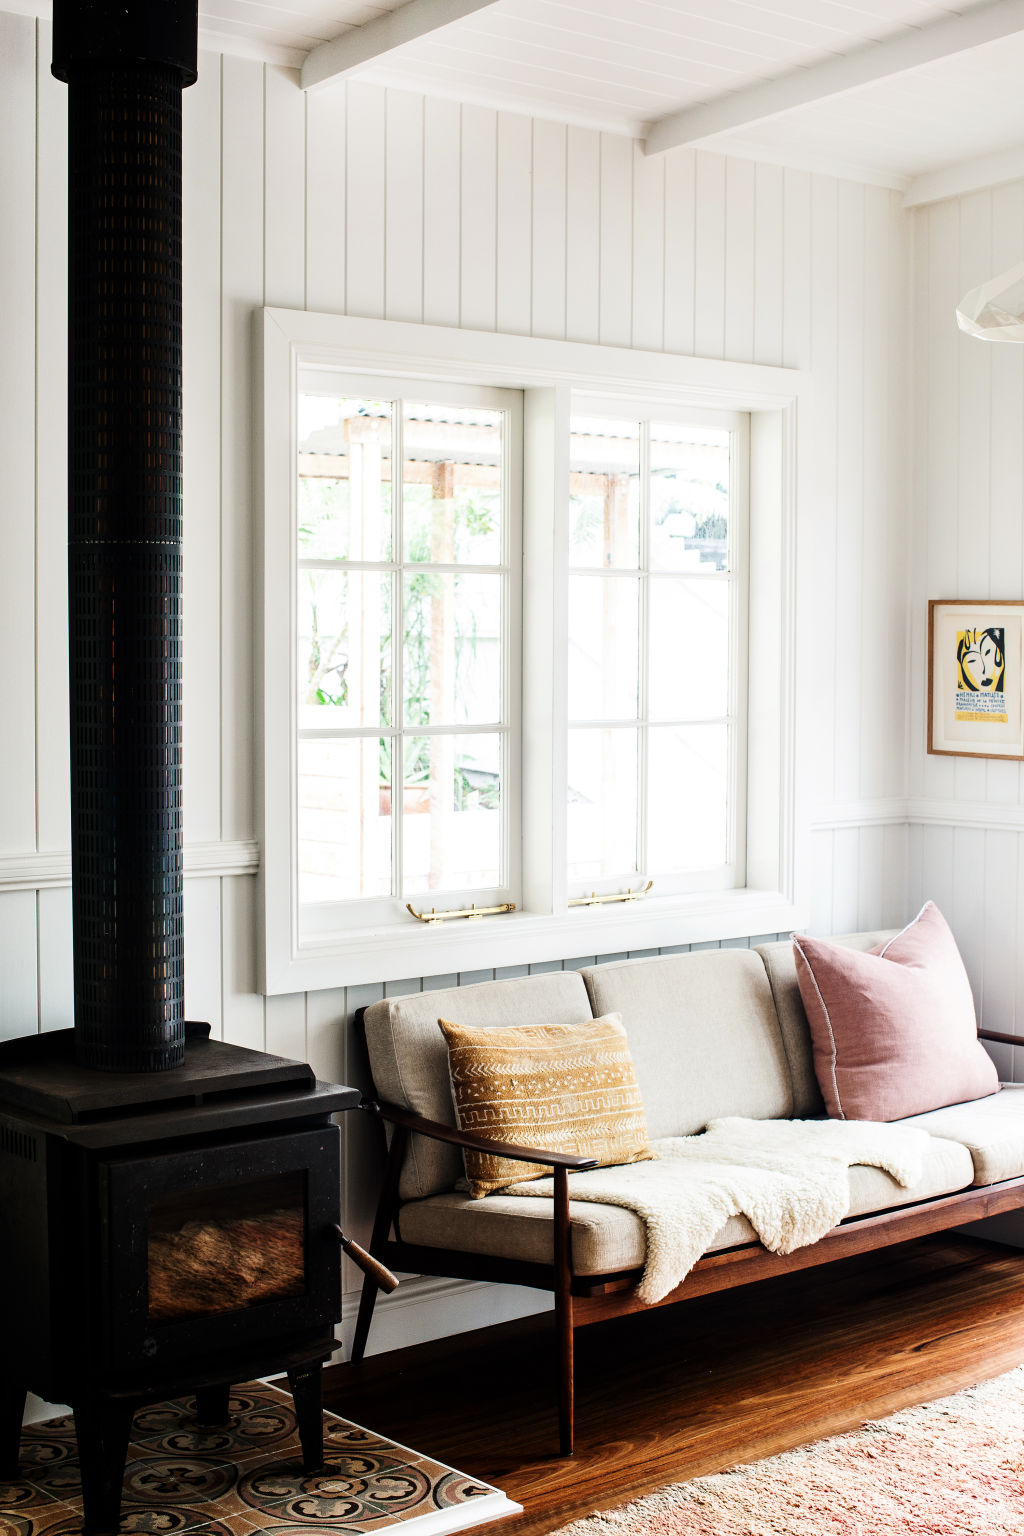 The sunroom – a favourite spot for the kids to sit and read. Photo: Kara Rosenlund